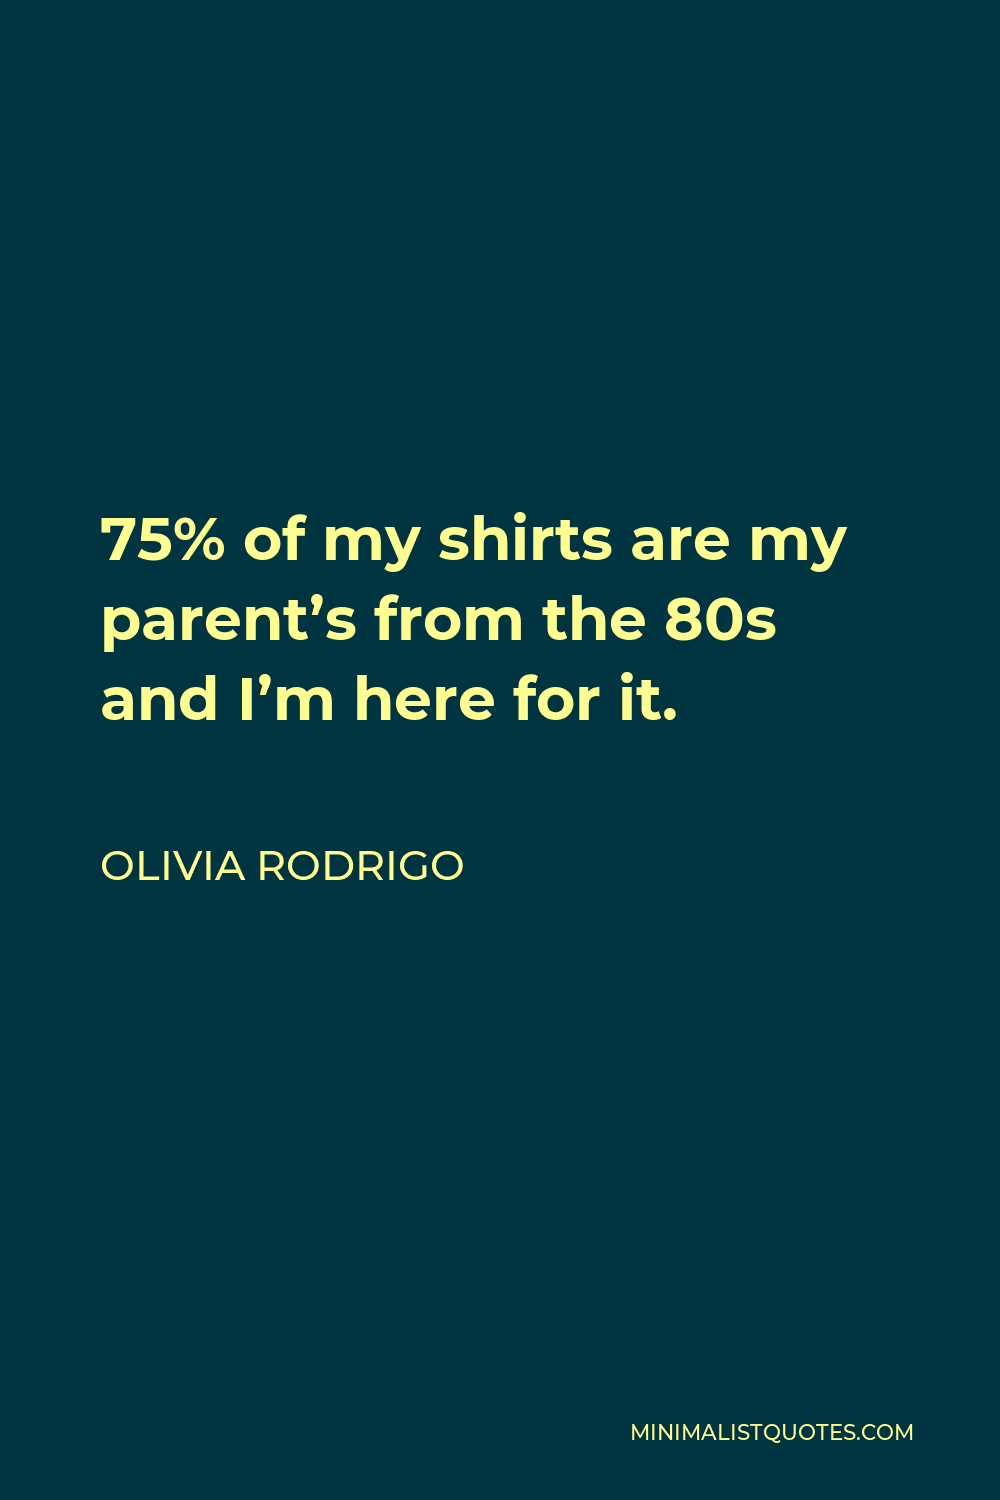 Olivia Rodrigo Quote - 75% of my shirts are my parent’s from the 80s and I’m here for it.